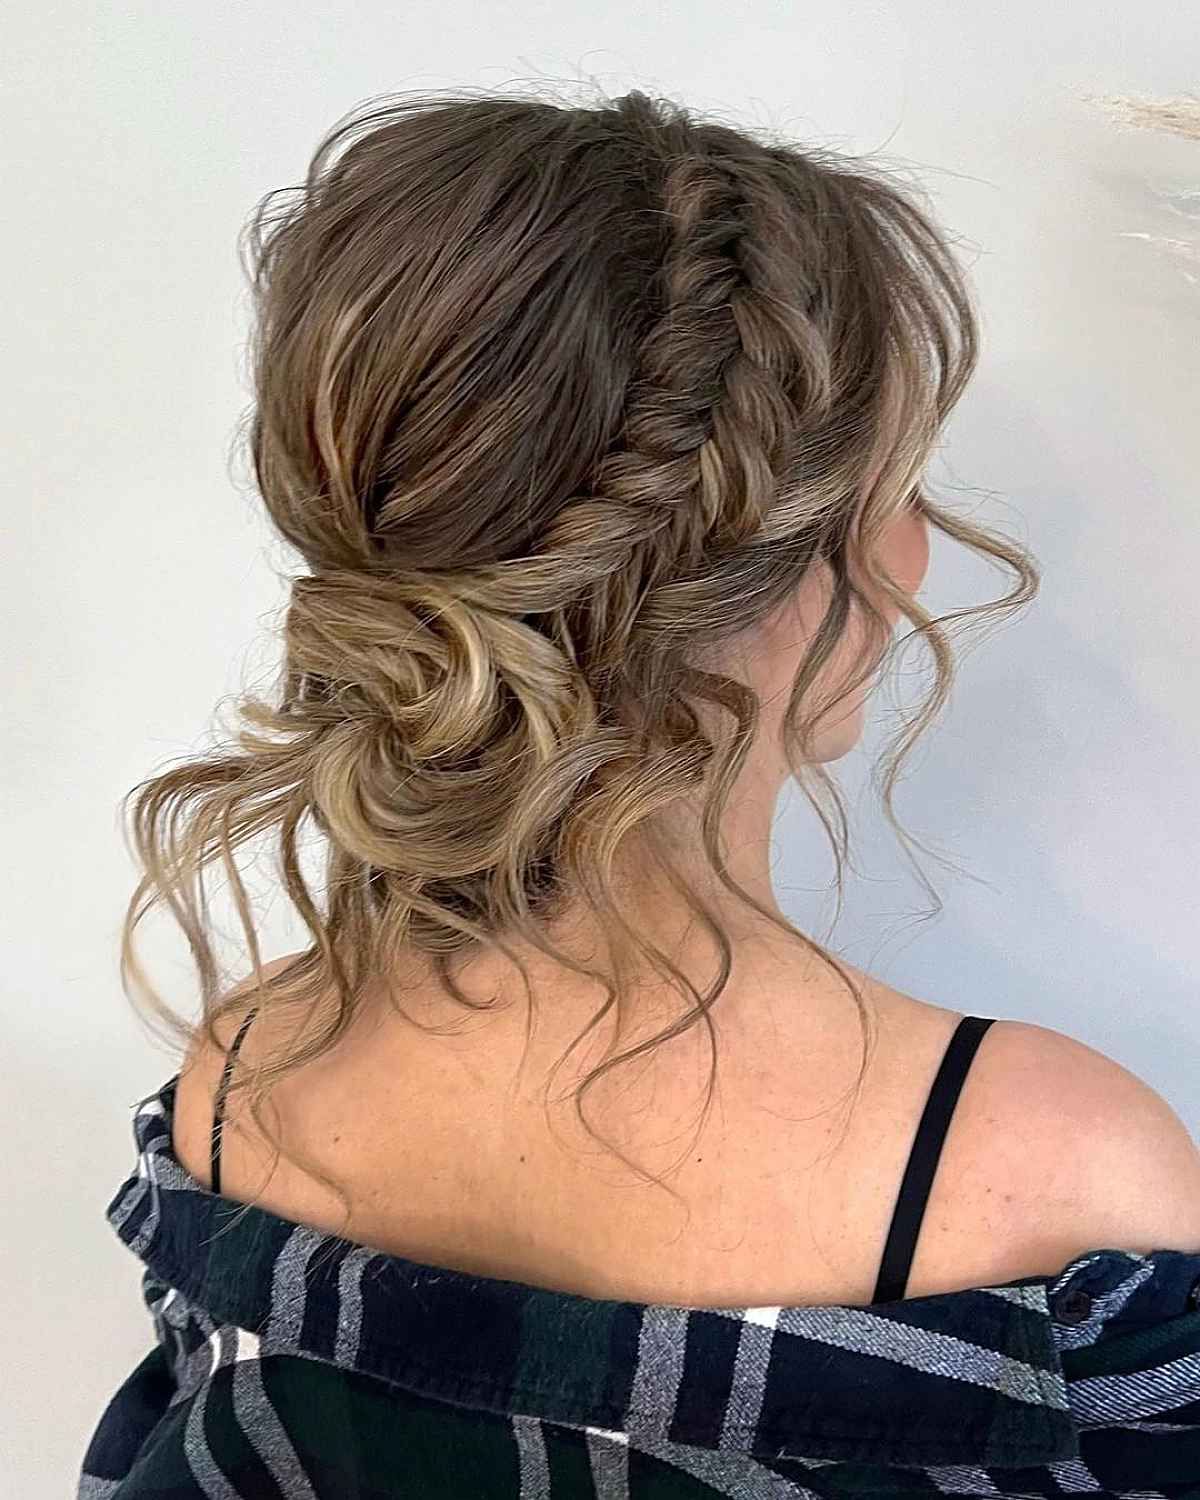 20 Romantic Bun Hairstyles For Prom That Are Easy To Do In Undone Side Braid And Bun Upstyle (View 3 of 25)